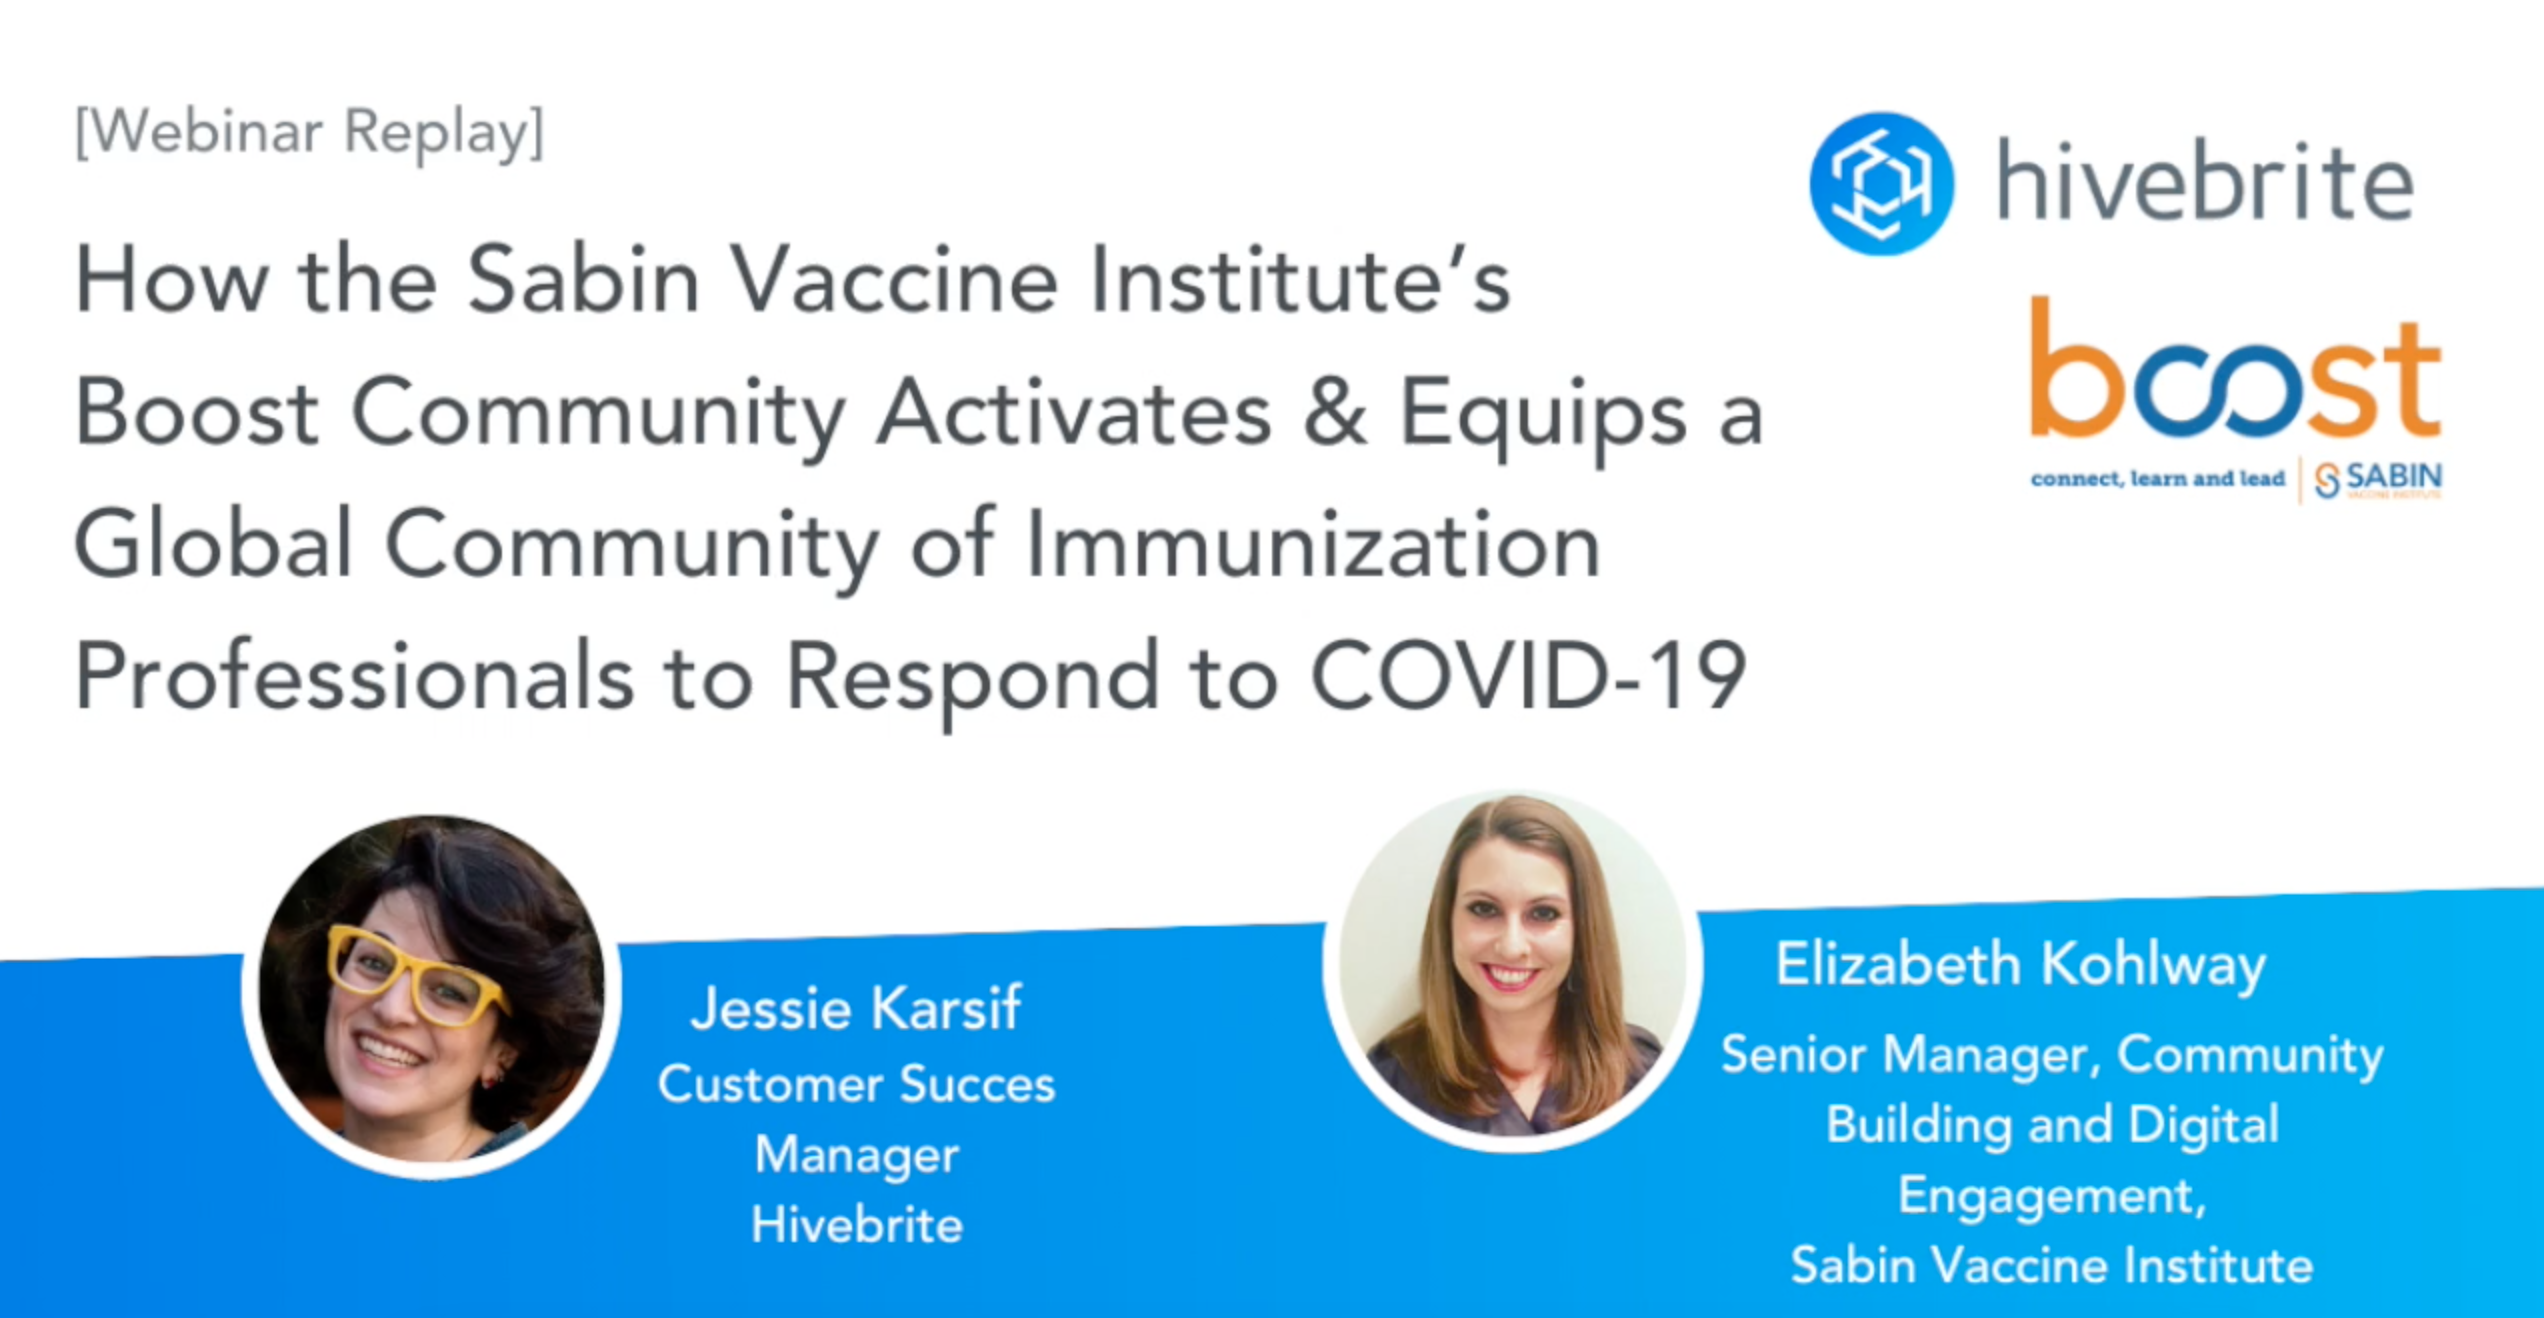 How the Boost Community Activates and Equips a Global Community of Immunization Professionals to Respond to COVID-19